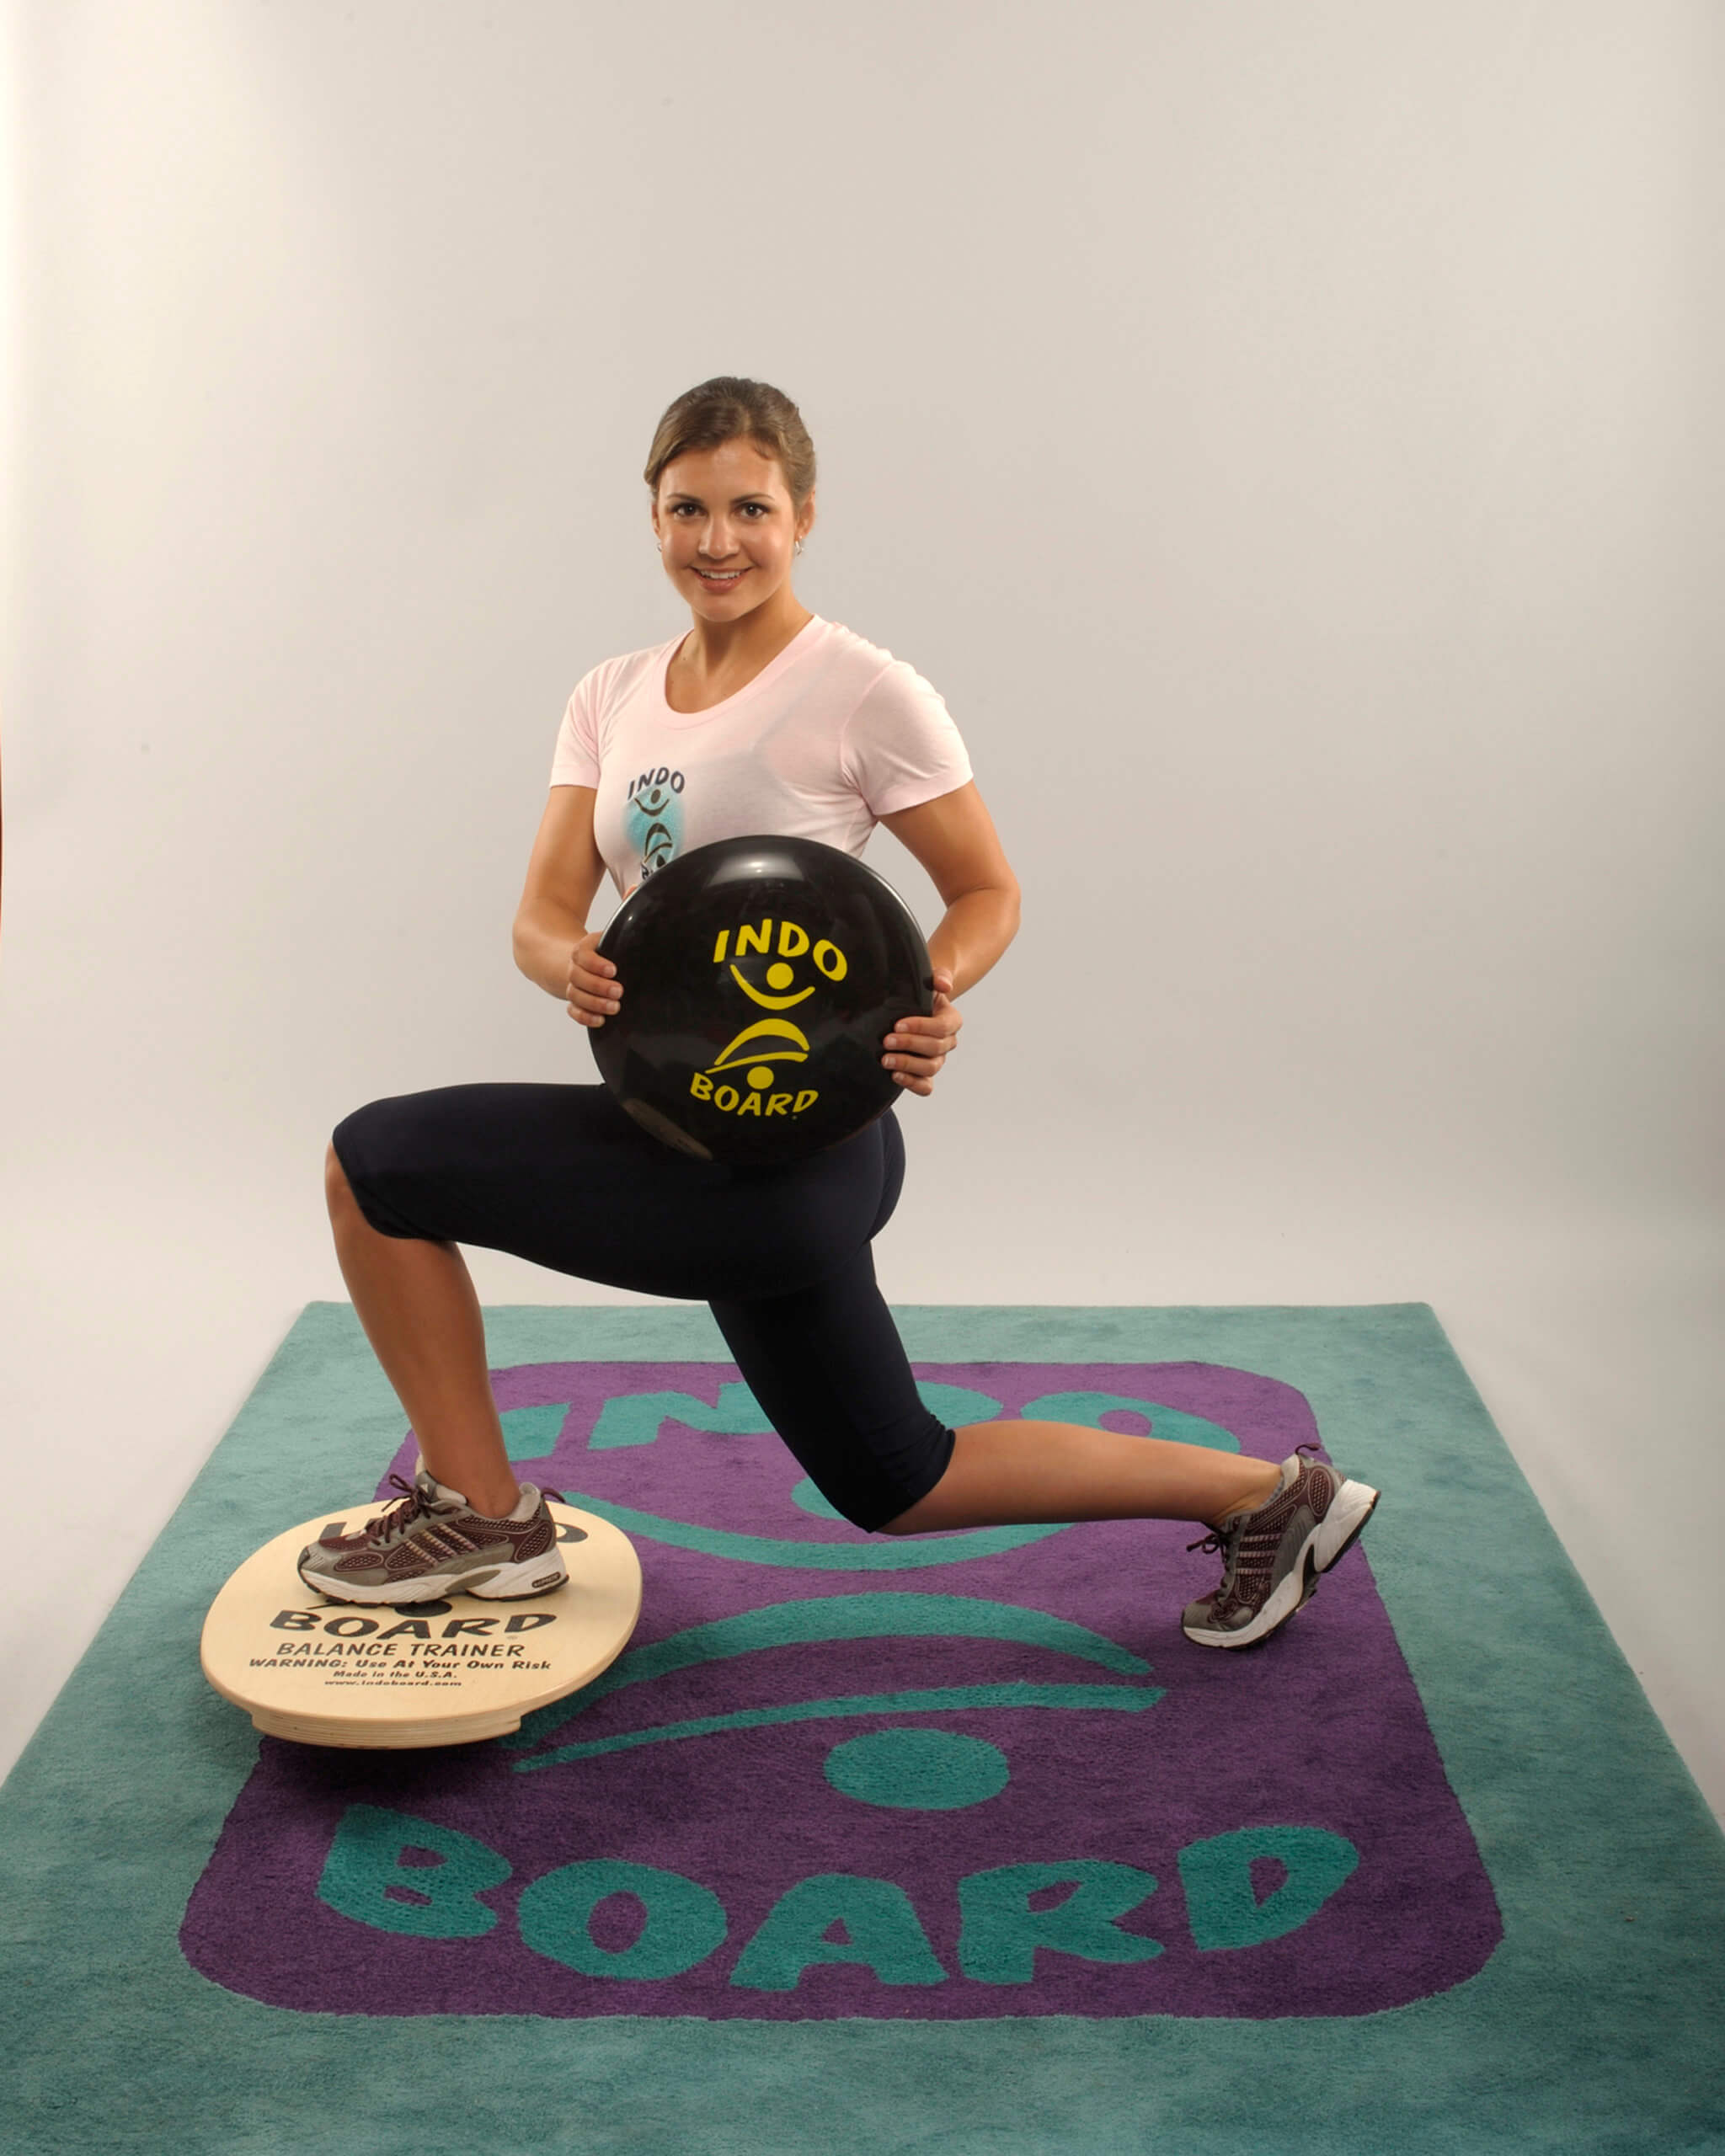 Woman with left leg bent and placed on a balance board, and her rigth leg extended and bent behind her, doing a lunge with the front leg balanced on the Indo Board instead of the floor.